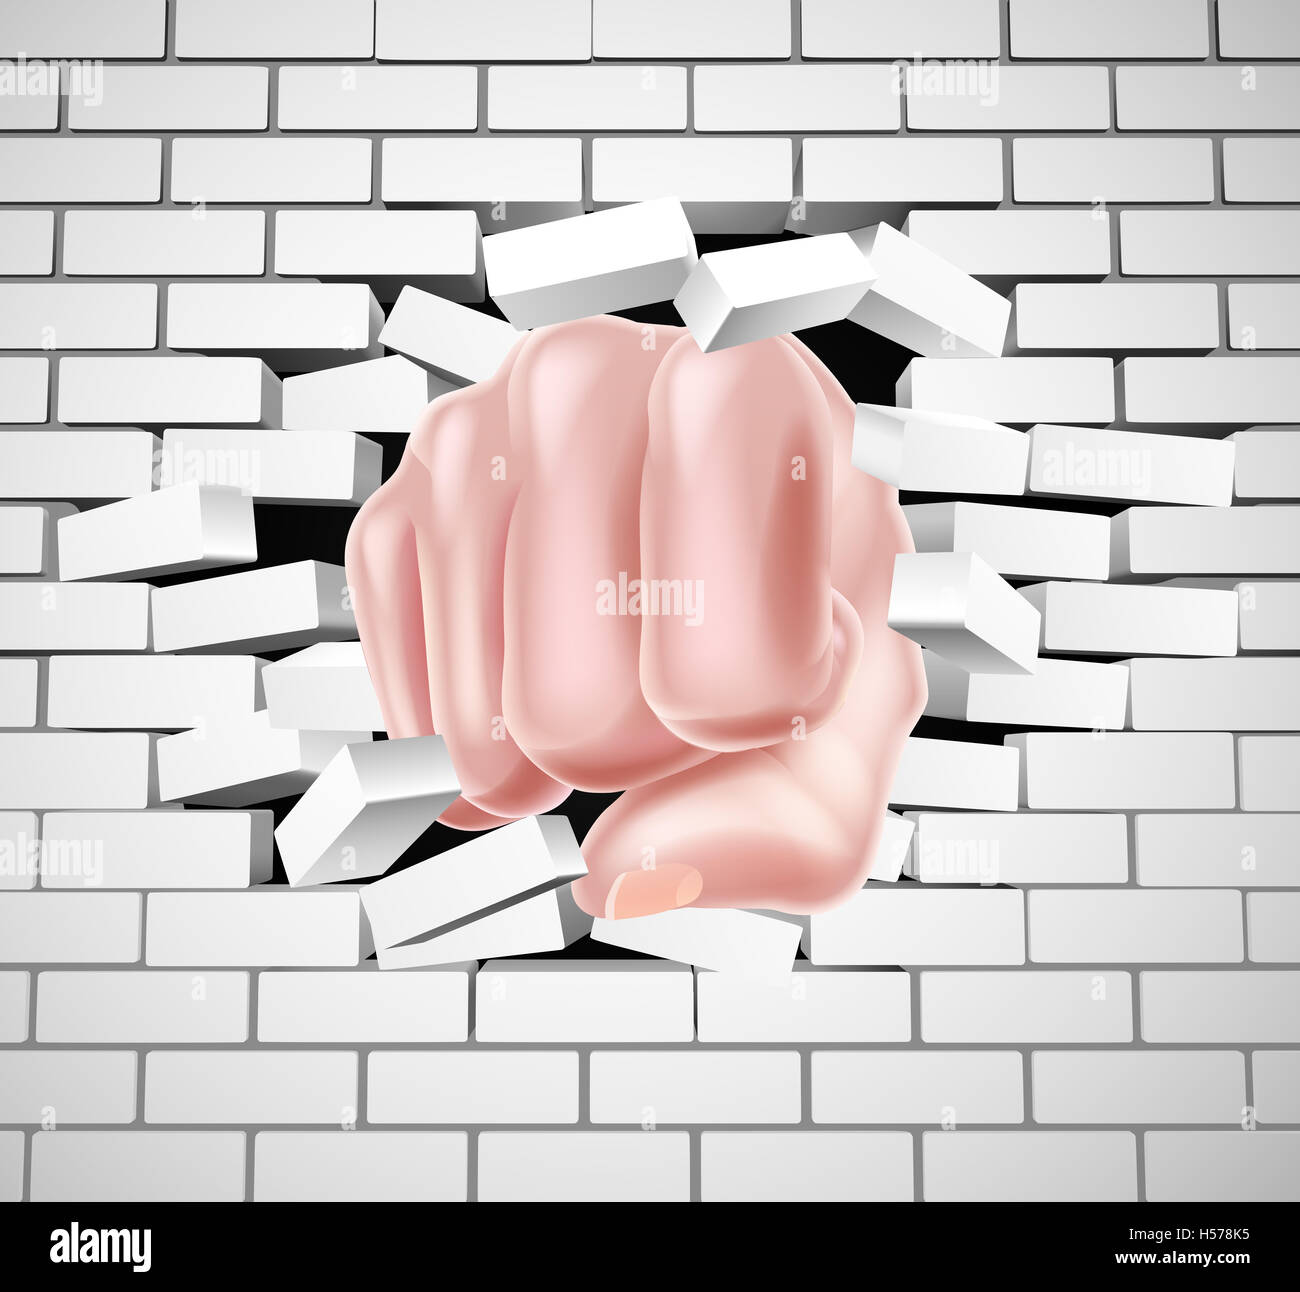 Hand in fist punching through a white brick wall Stock Photo